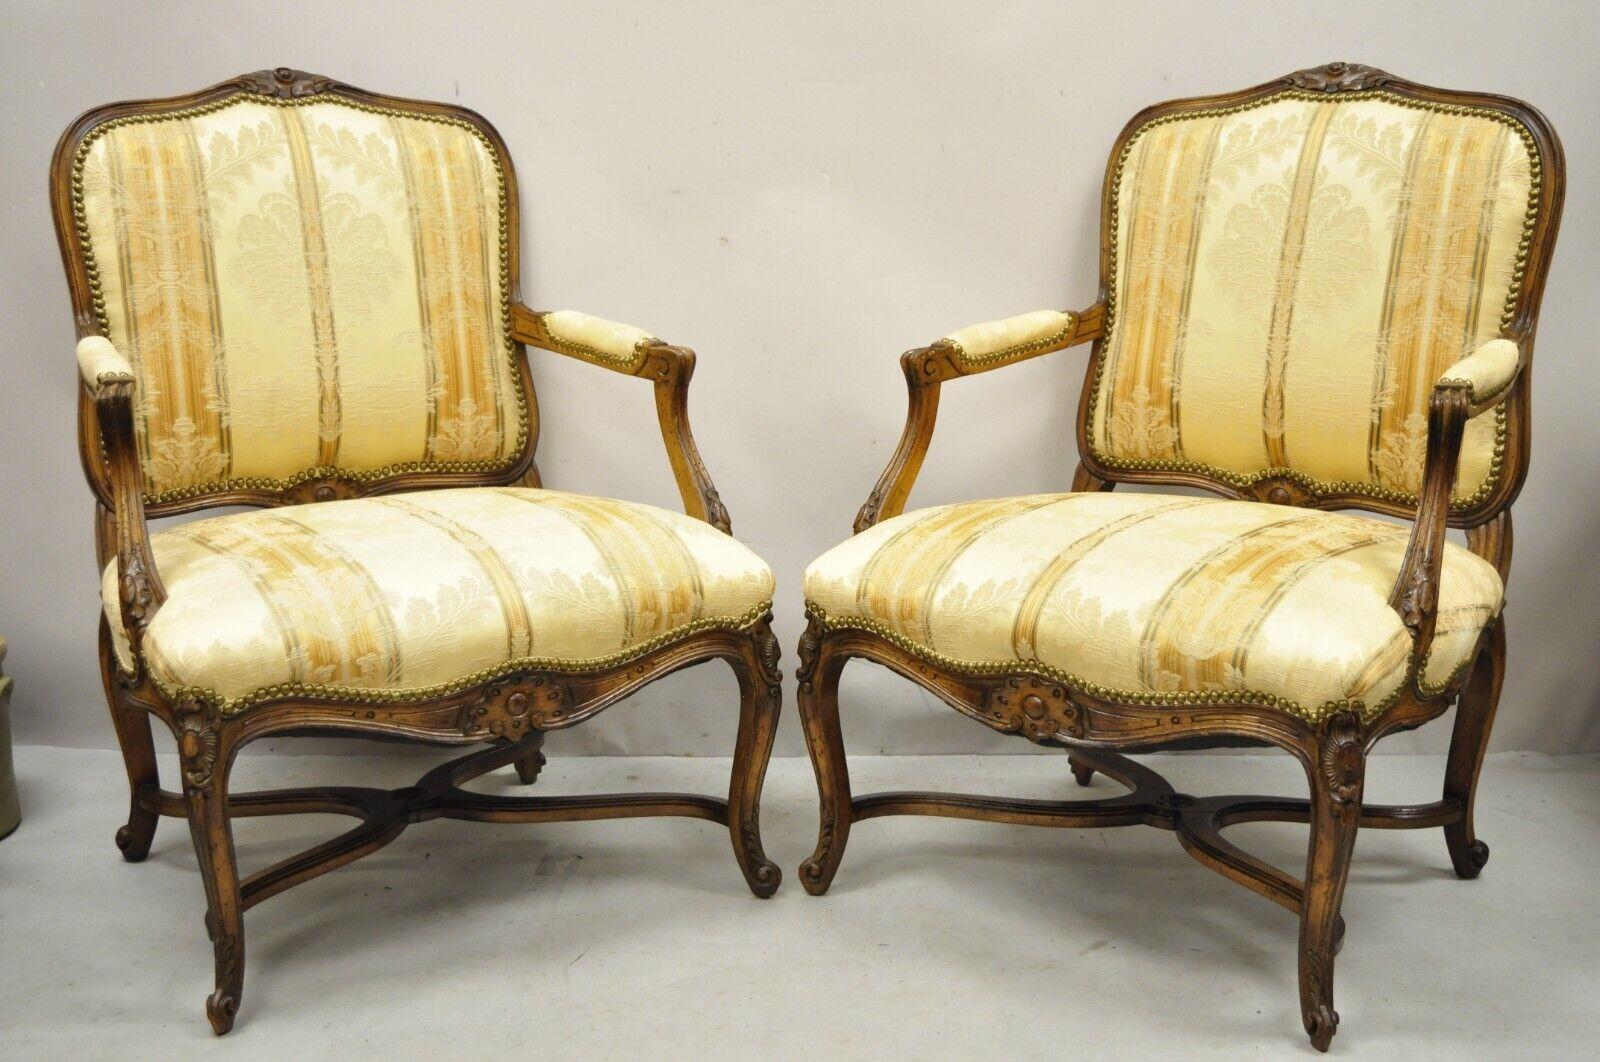 Vintage French Provincial Louis XV Country Style Lounge Chairs - a Pair. Item features a cross stretcher base, beige floral print upholstery, solid wood frames, upholstered armrests, distressed finish, cabriole legs, very nice vintage pair. Circa